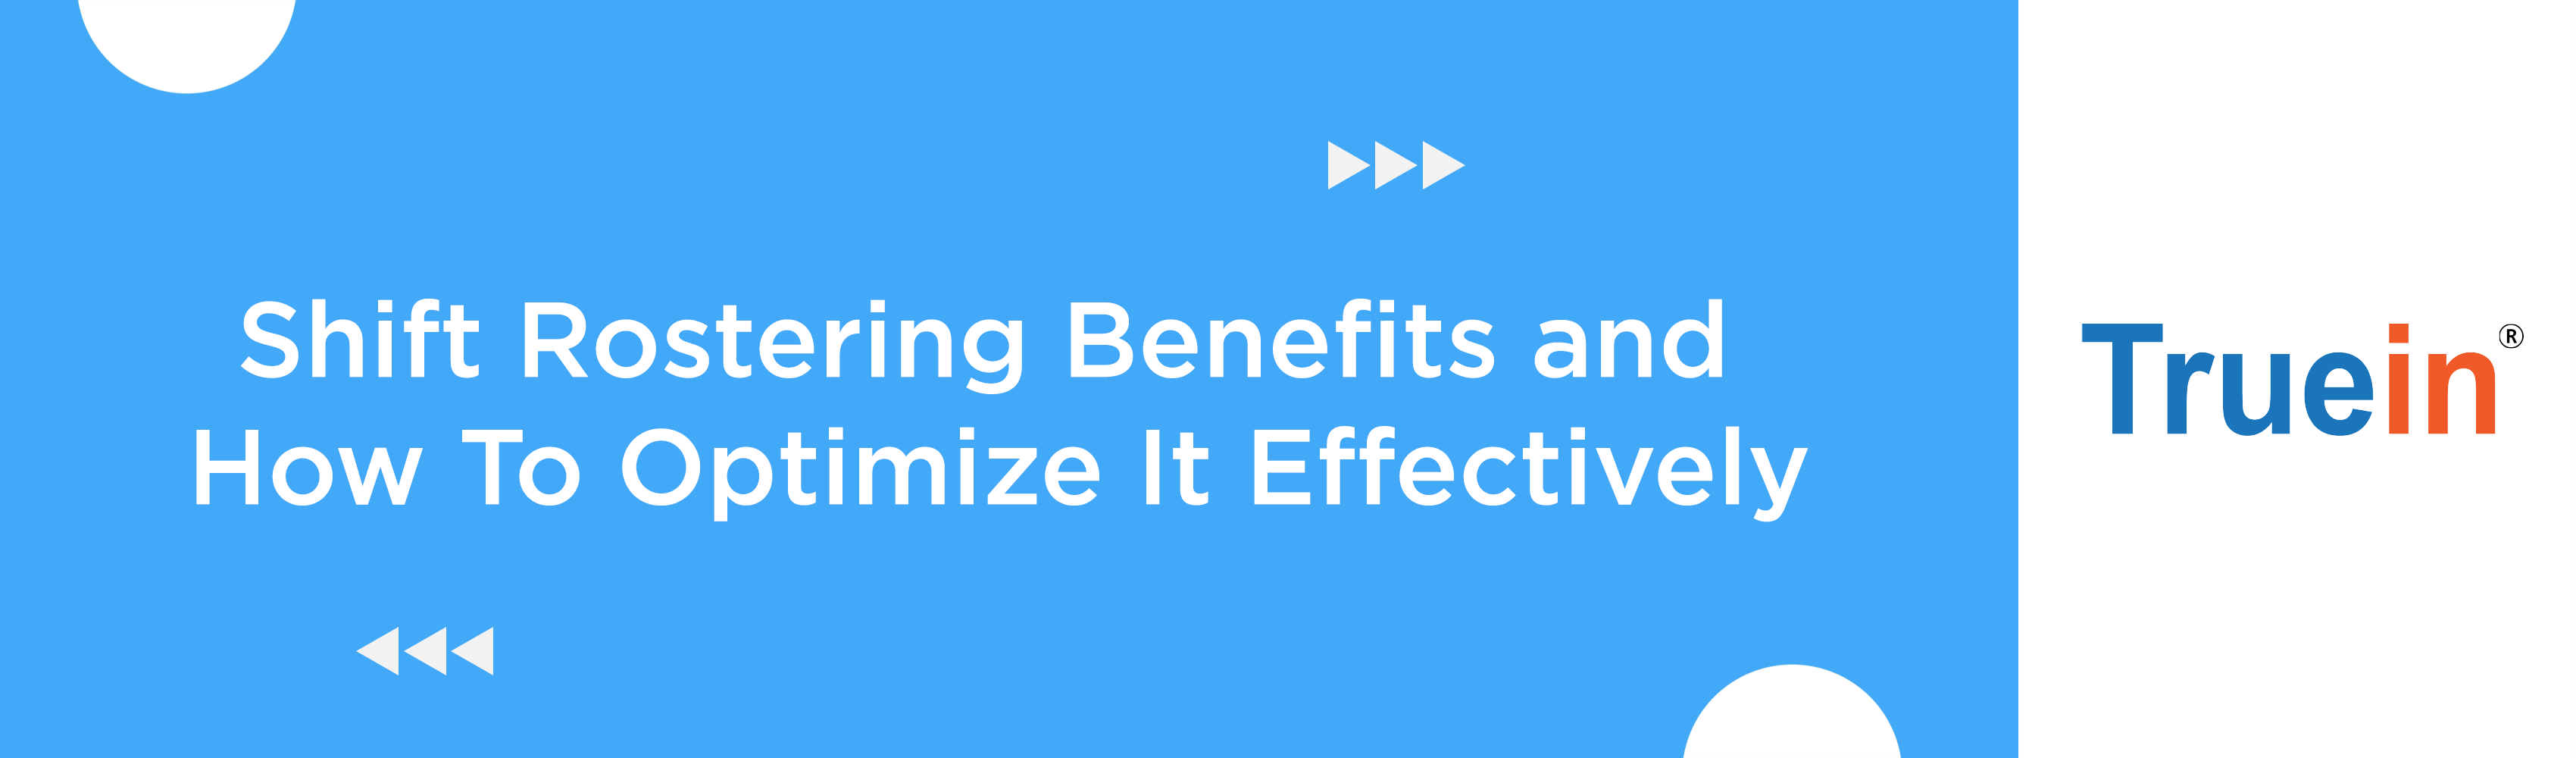 Shift Rostering Benefits & 5 Ways for Organizations To Optimize Employee Shift Management Effectively